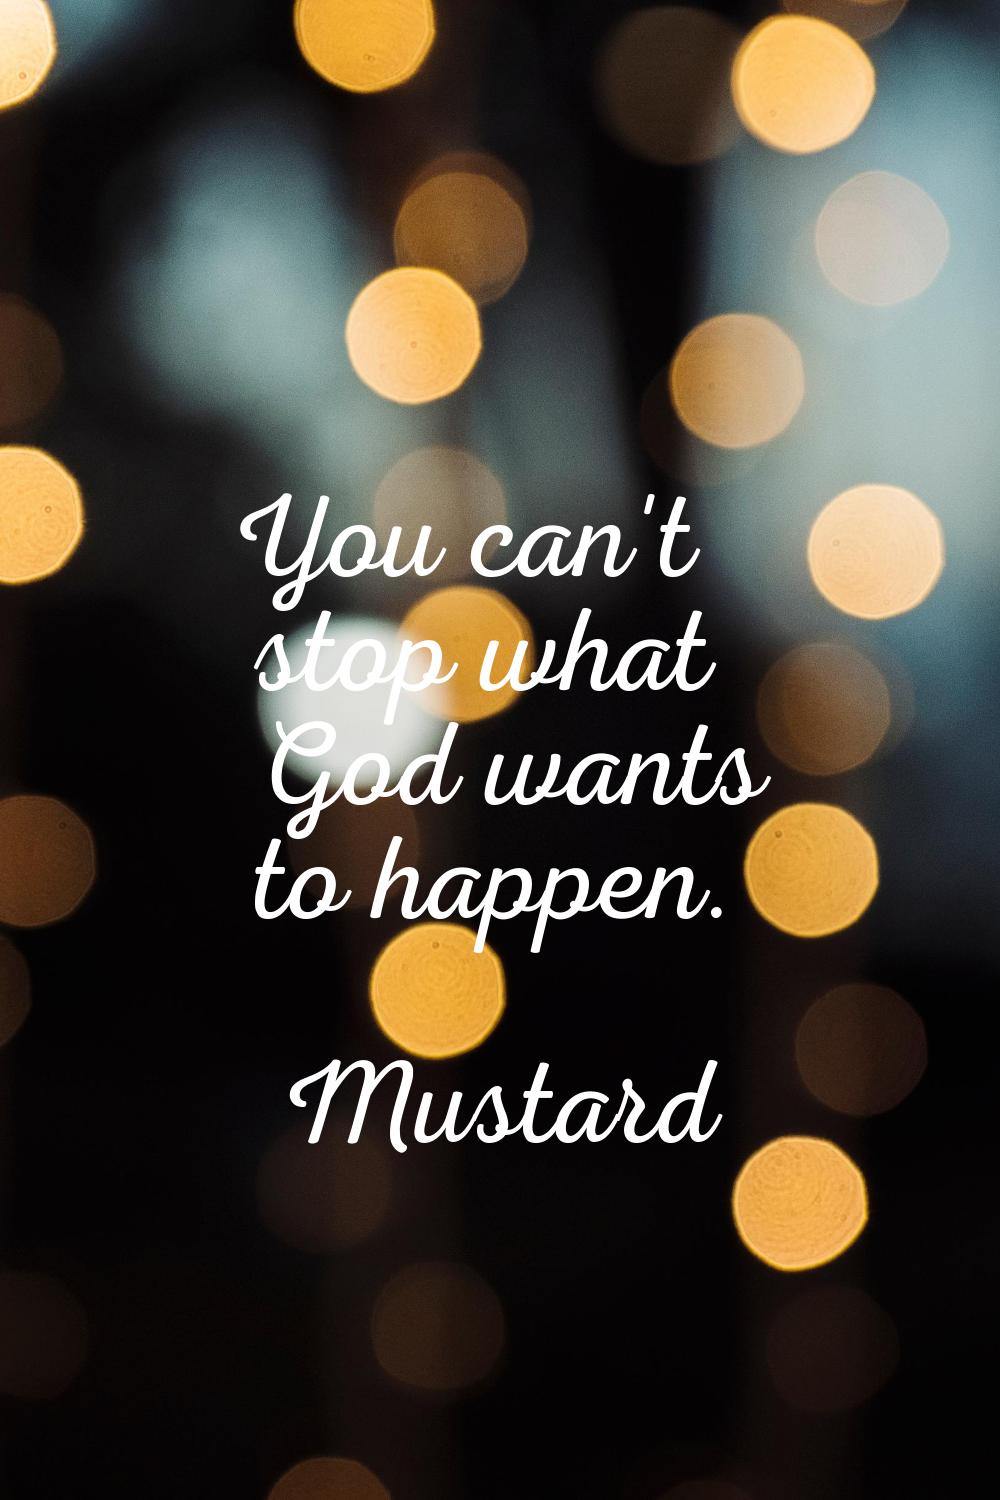 You can't stop what God wants to happen.